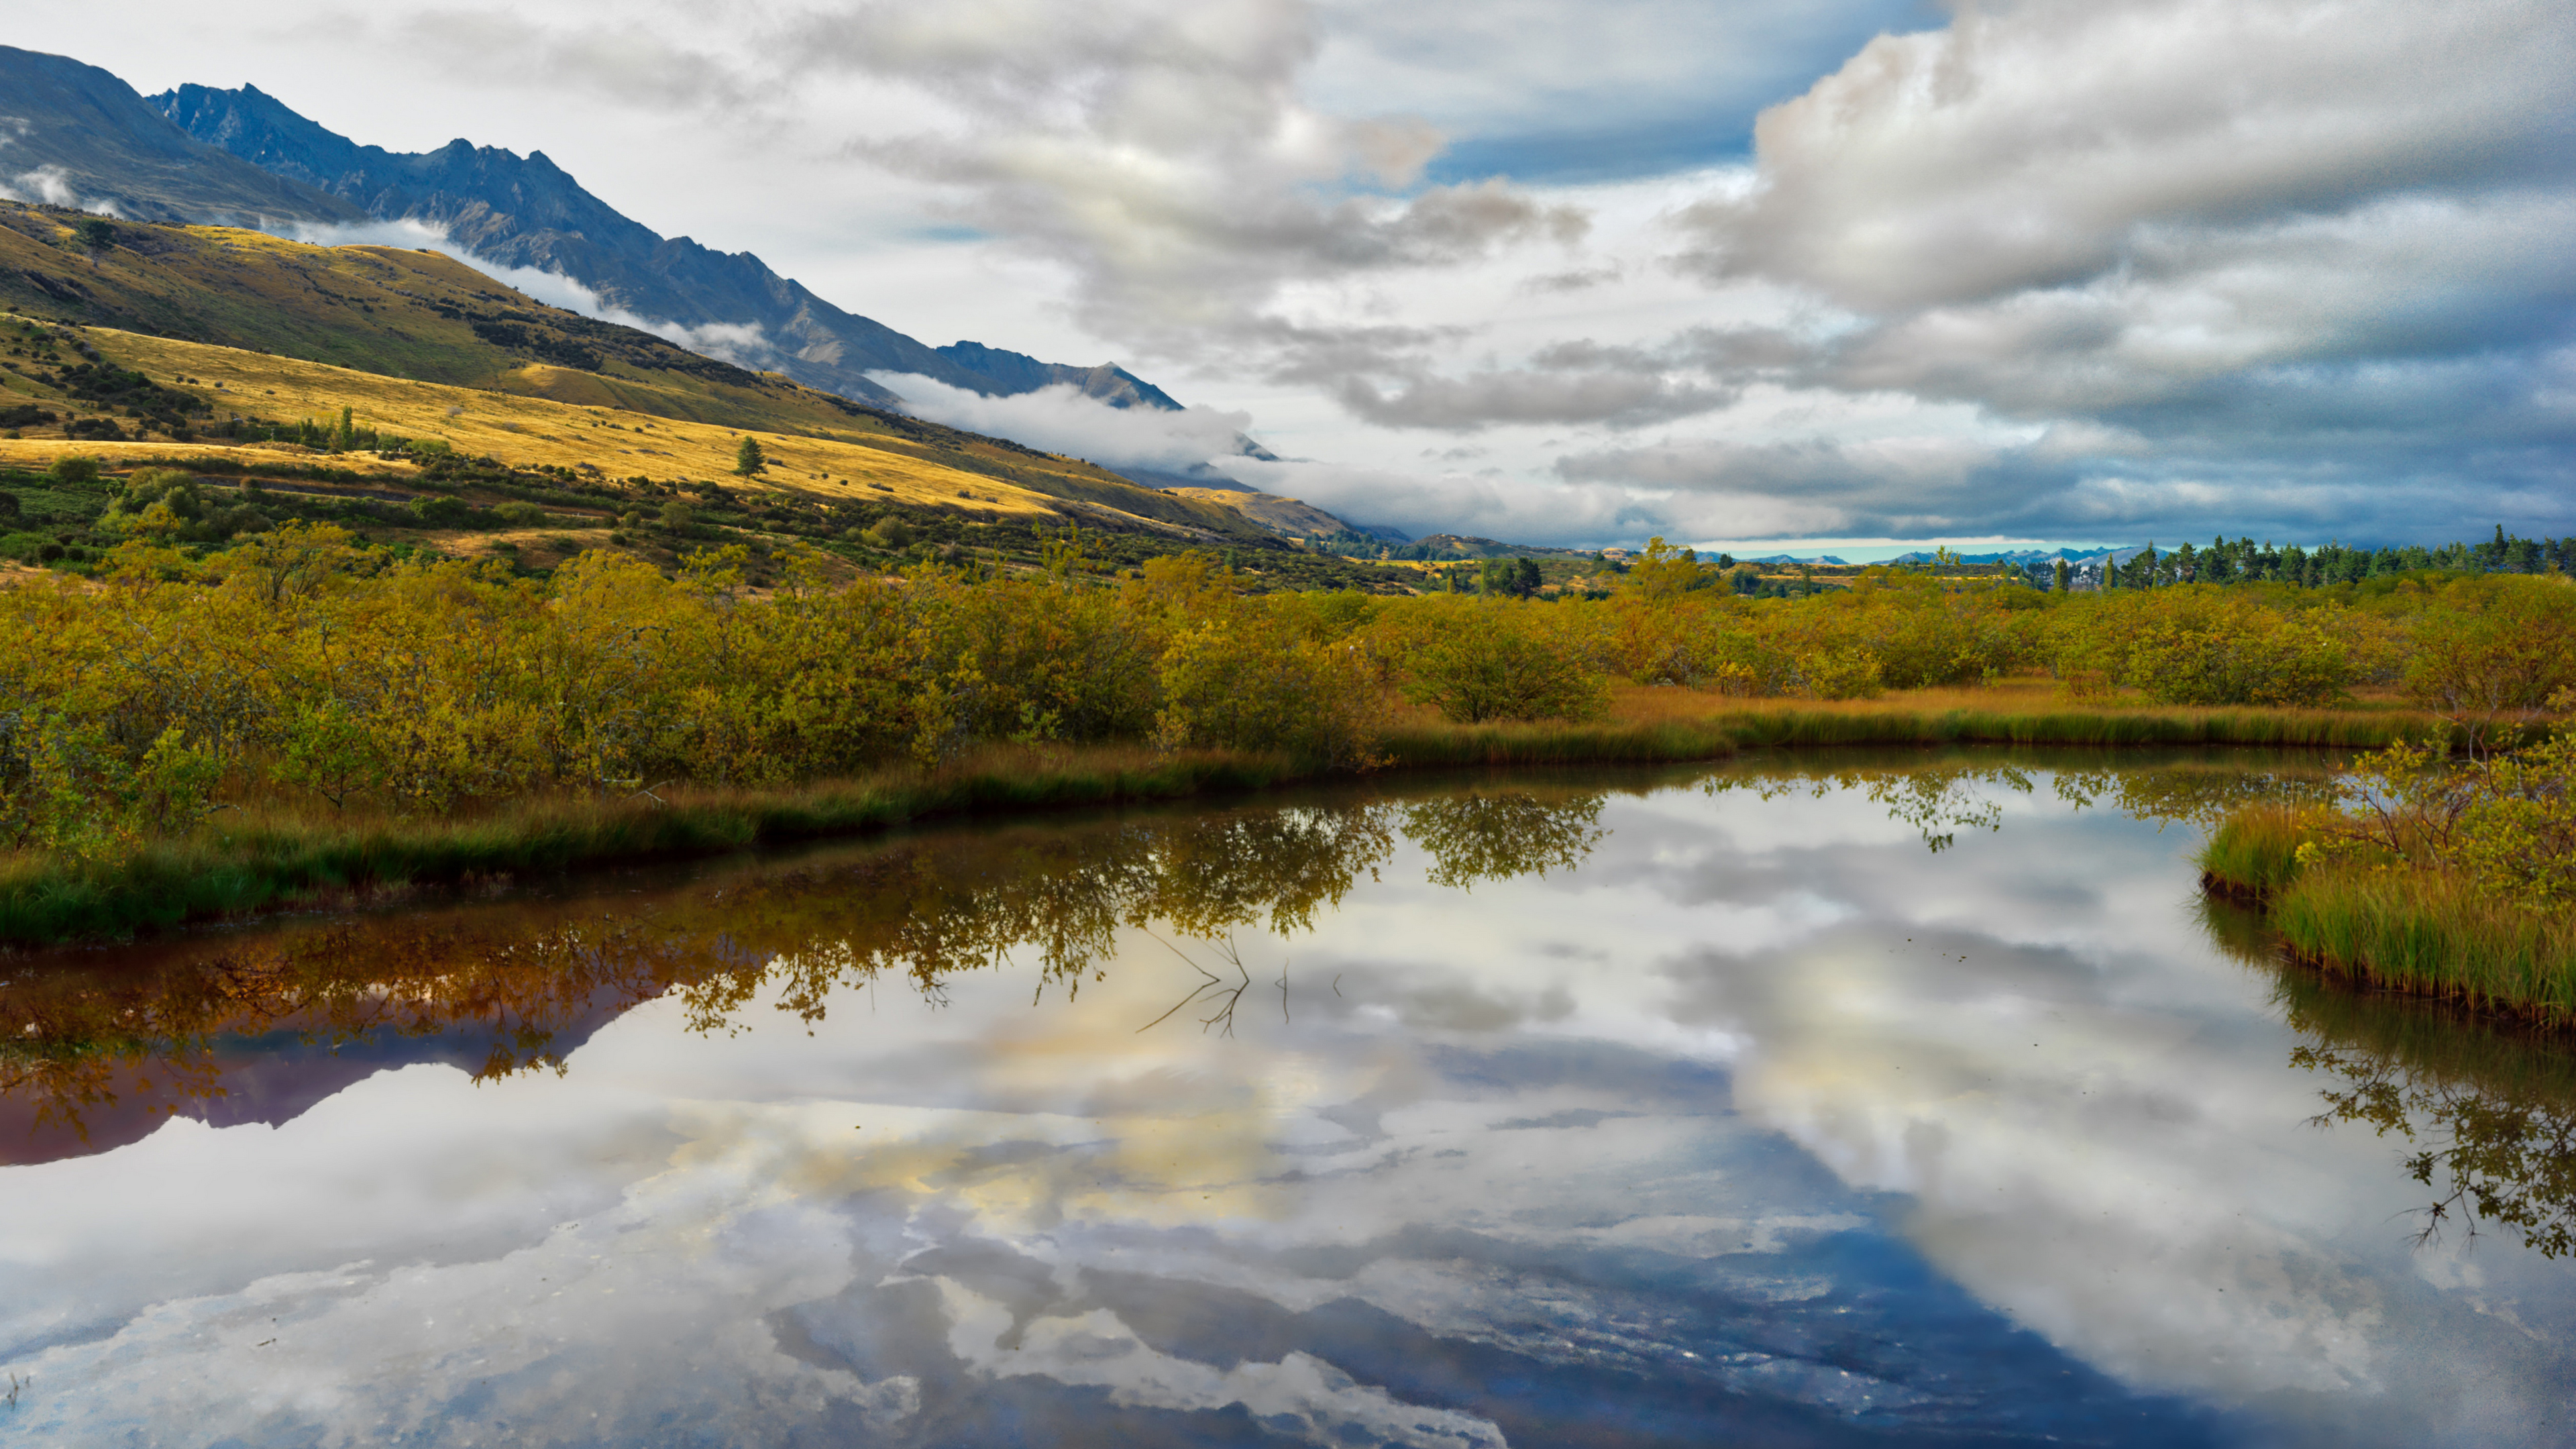 Photography Landscape Nature Outdoors Glenorchy New Zealand Mountains Water Hills Reflection Shore T 3840x2160